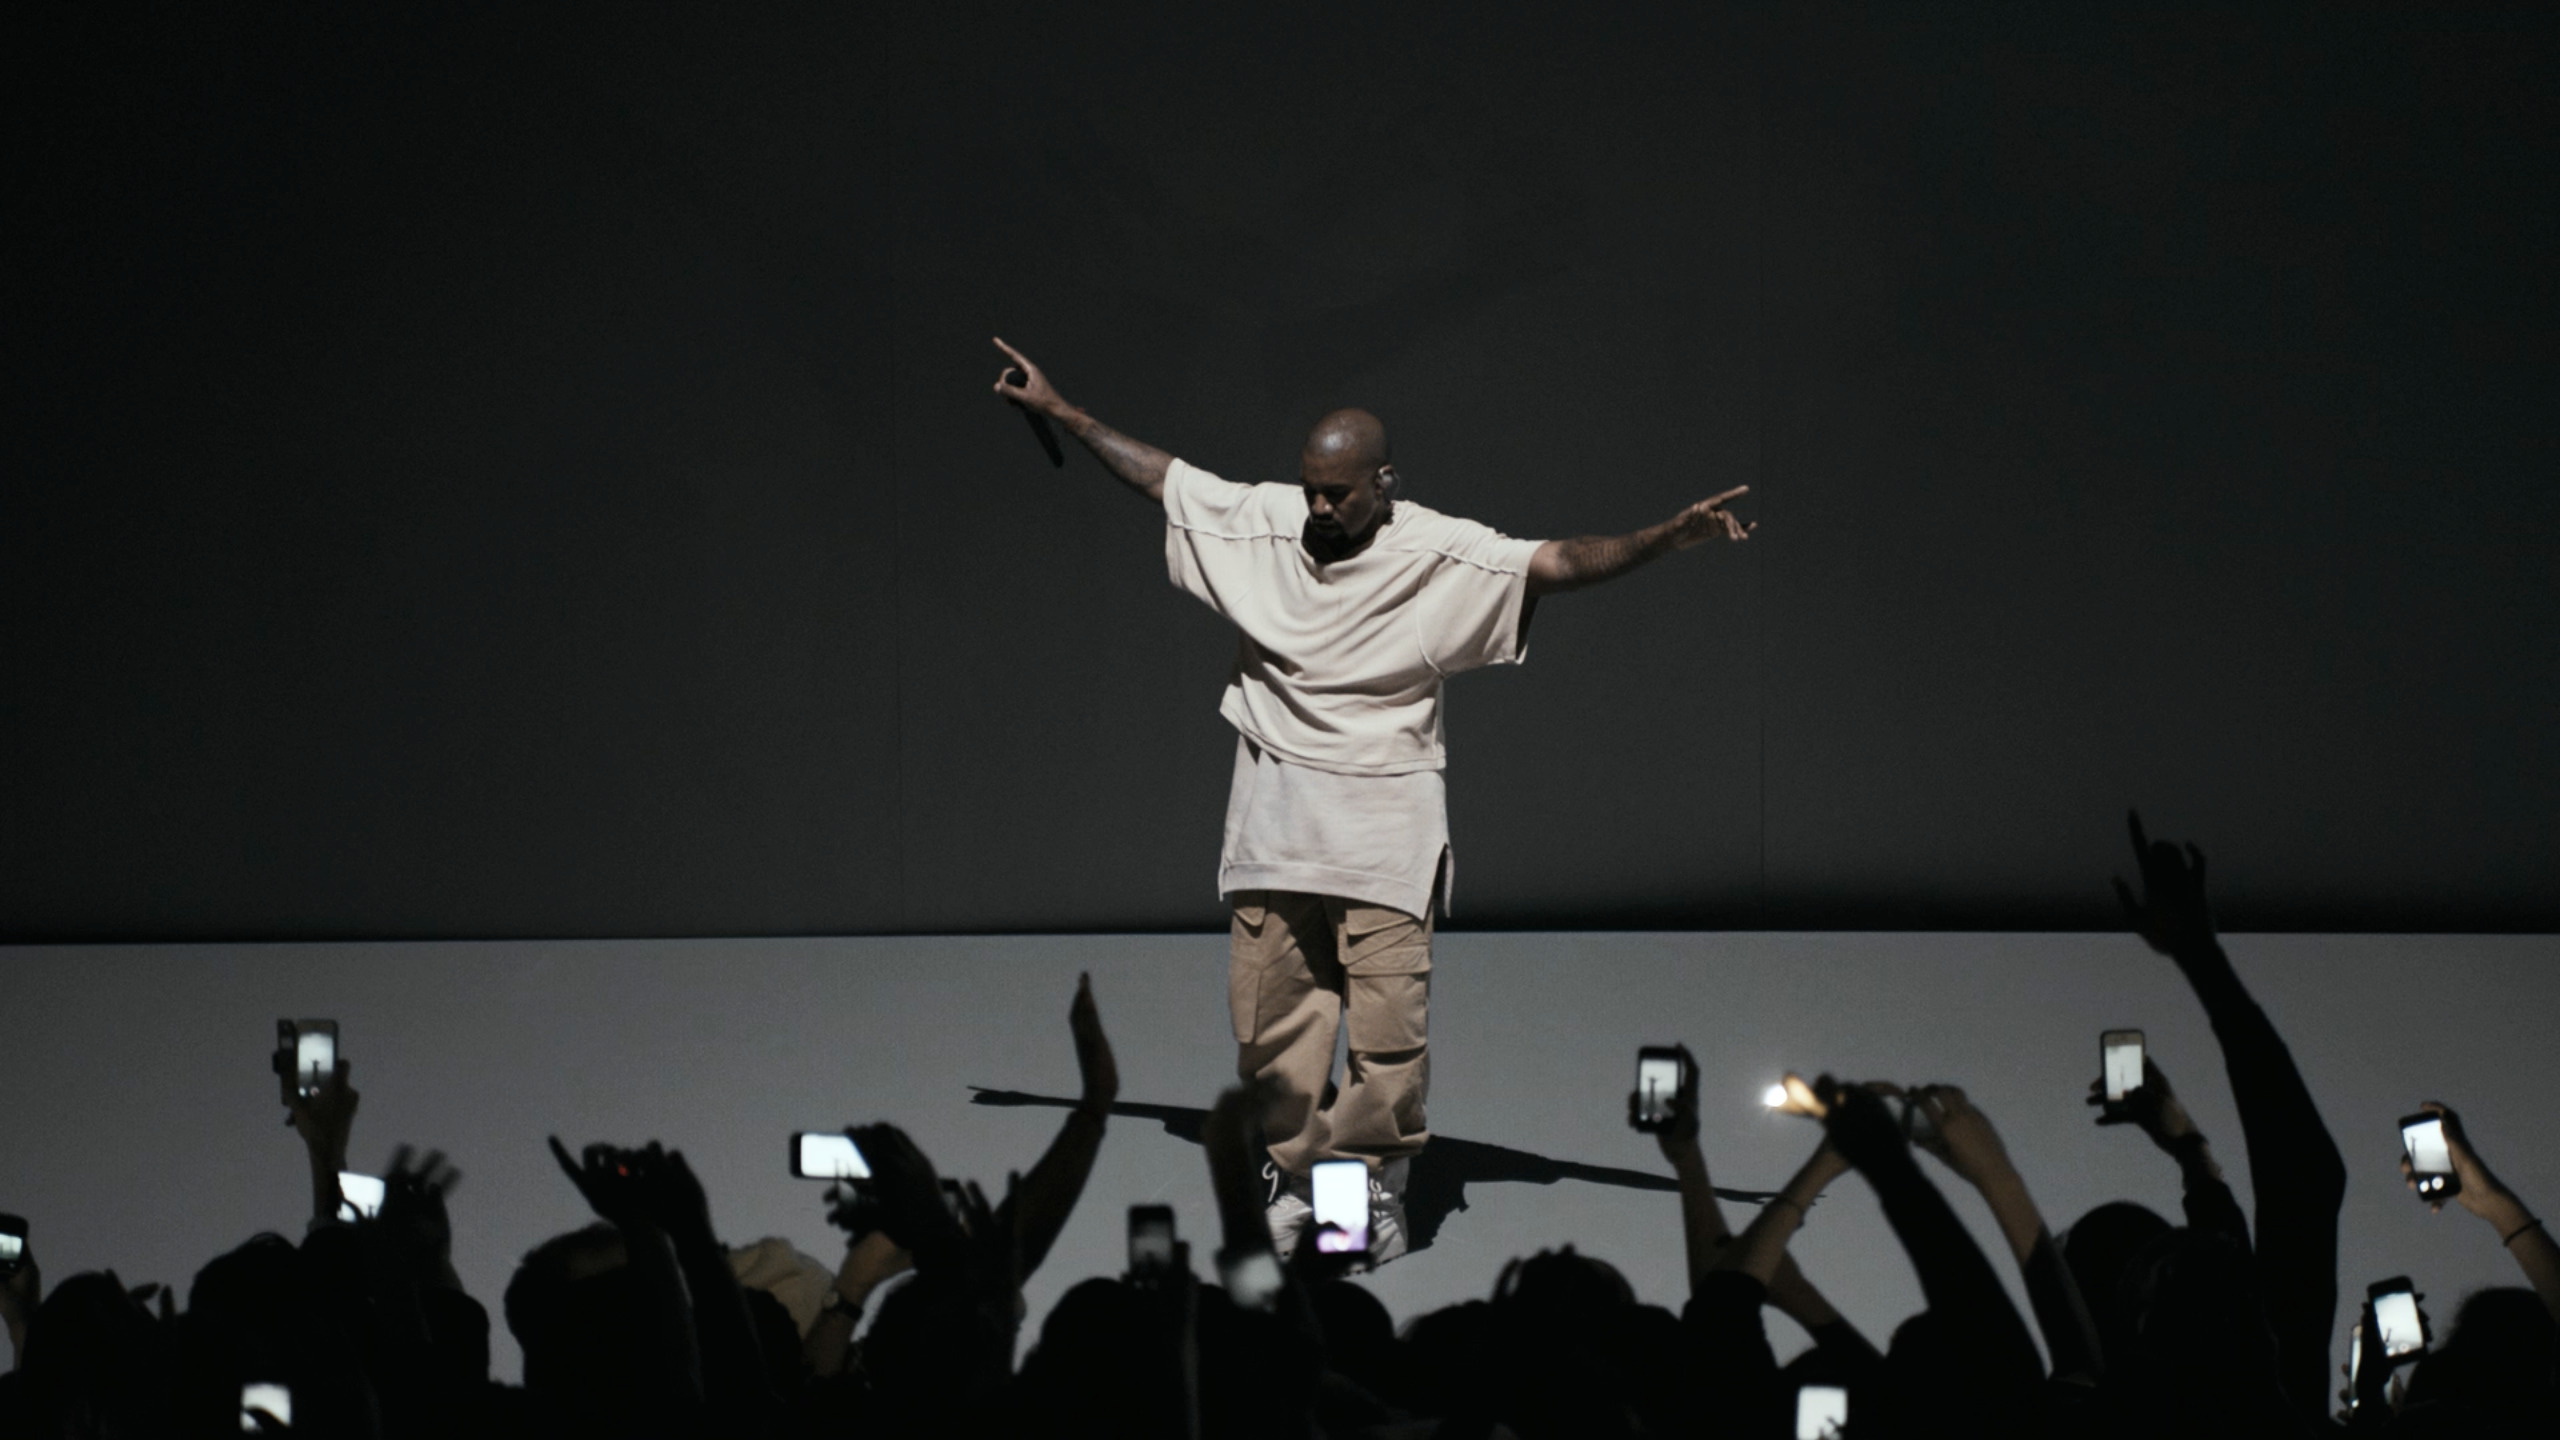 Kanye West's Four-Night Residency at Fondation Louis Vuitton